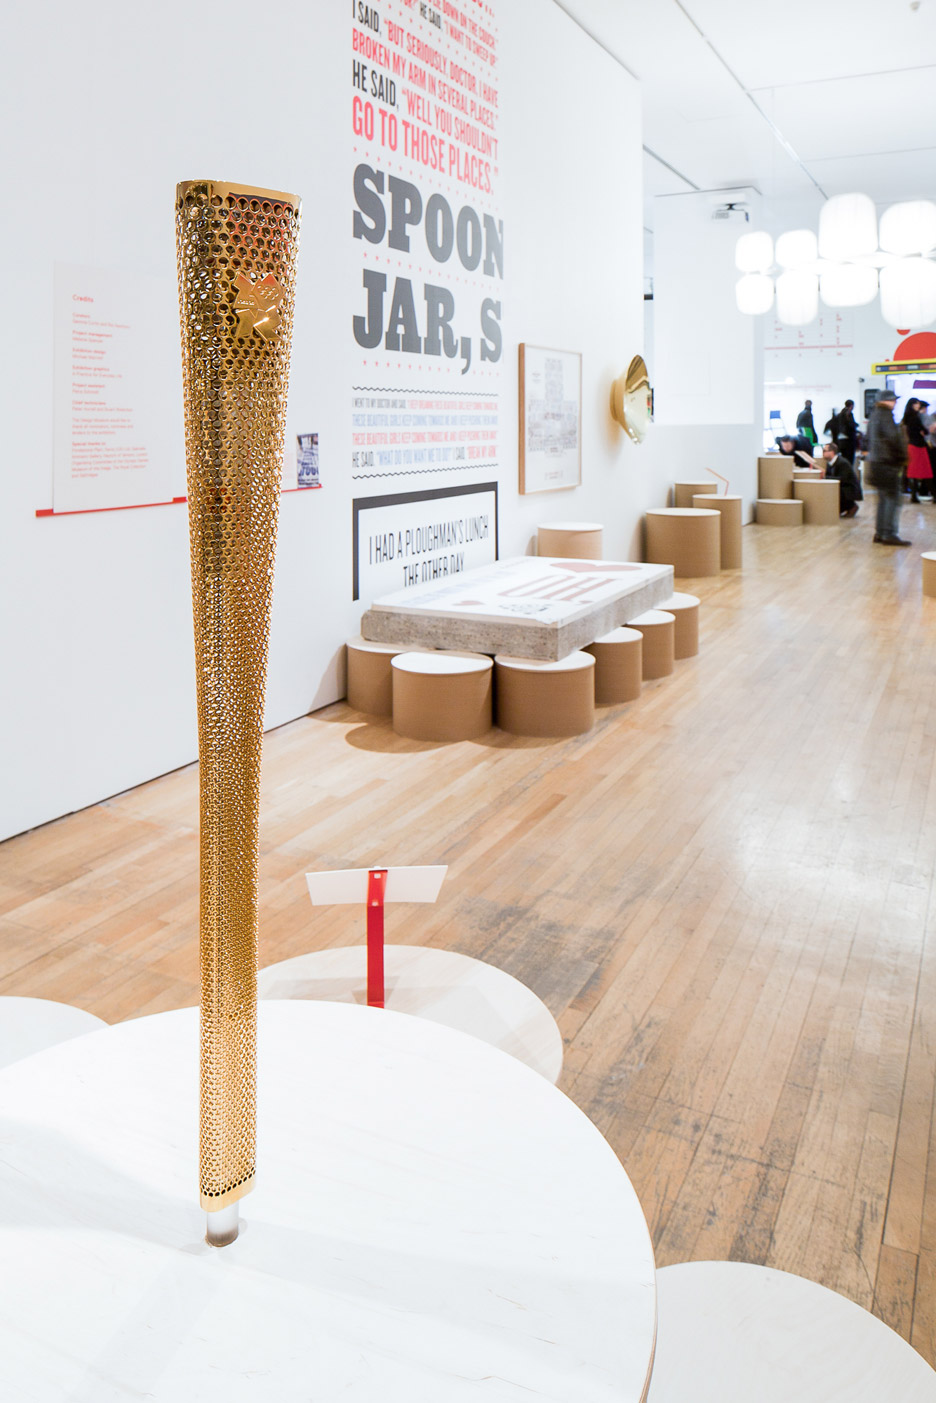 Design Museum highlights exhibition as the museum moves homes